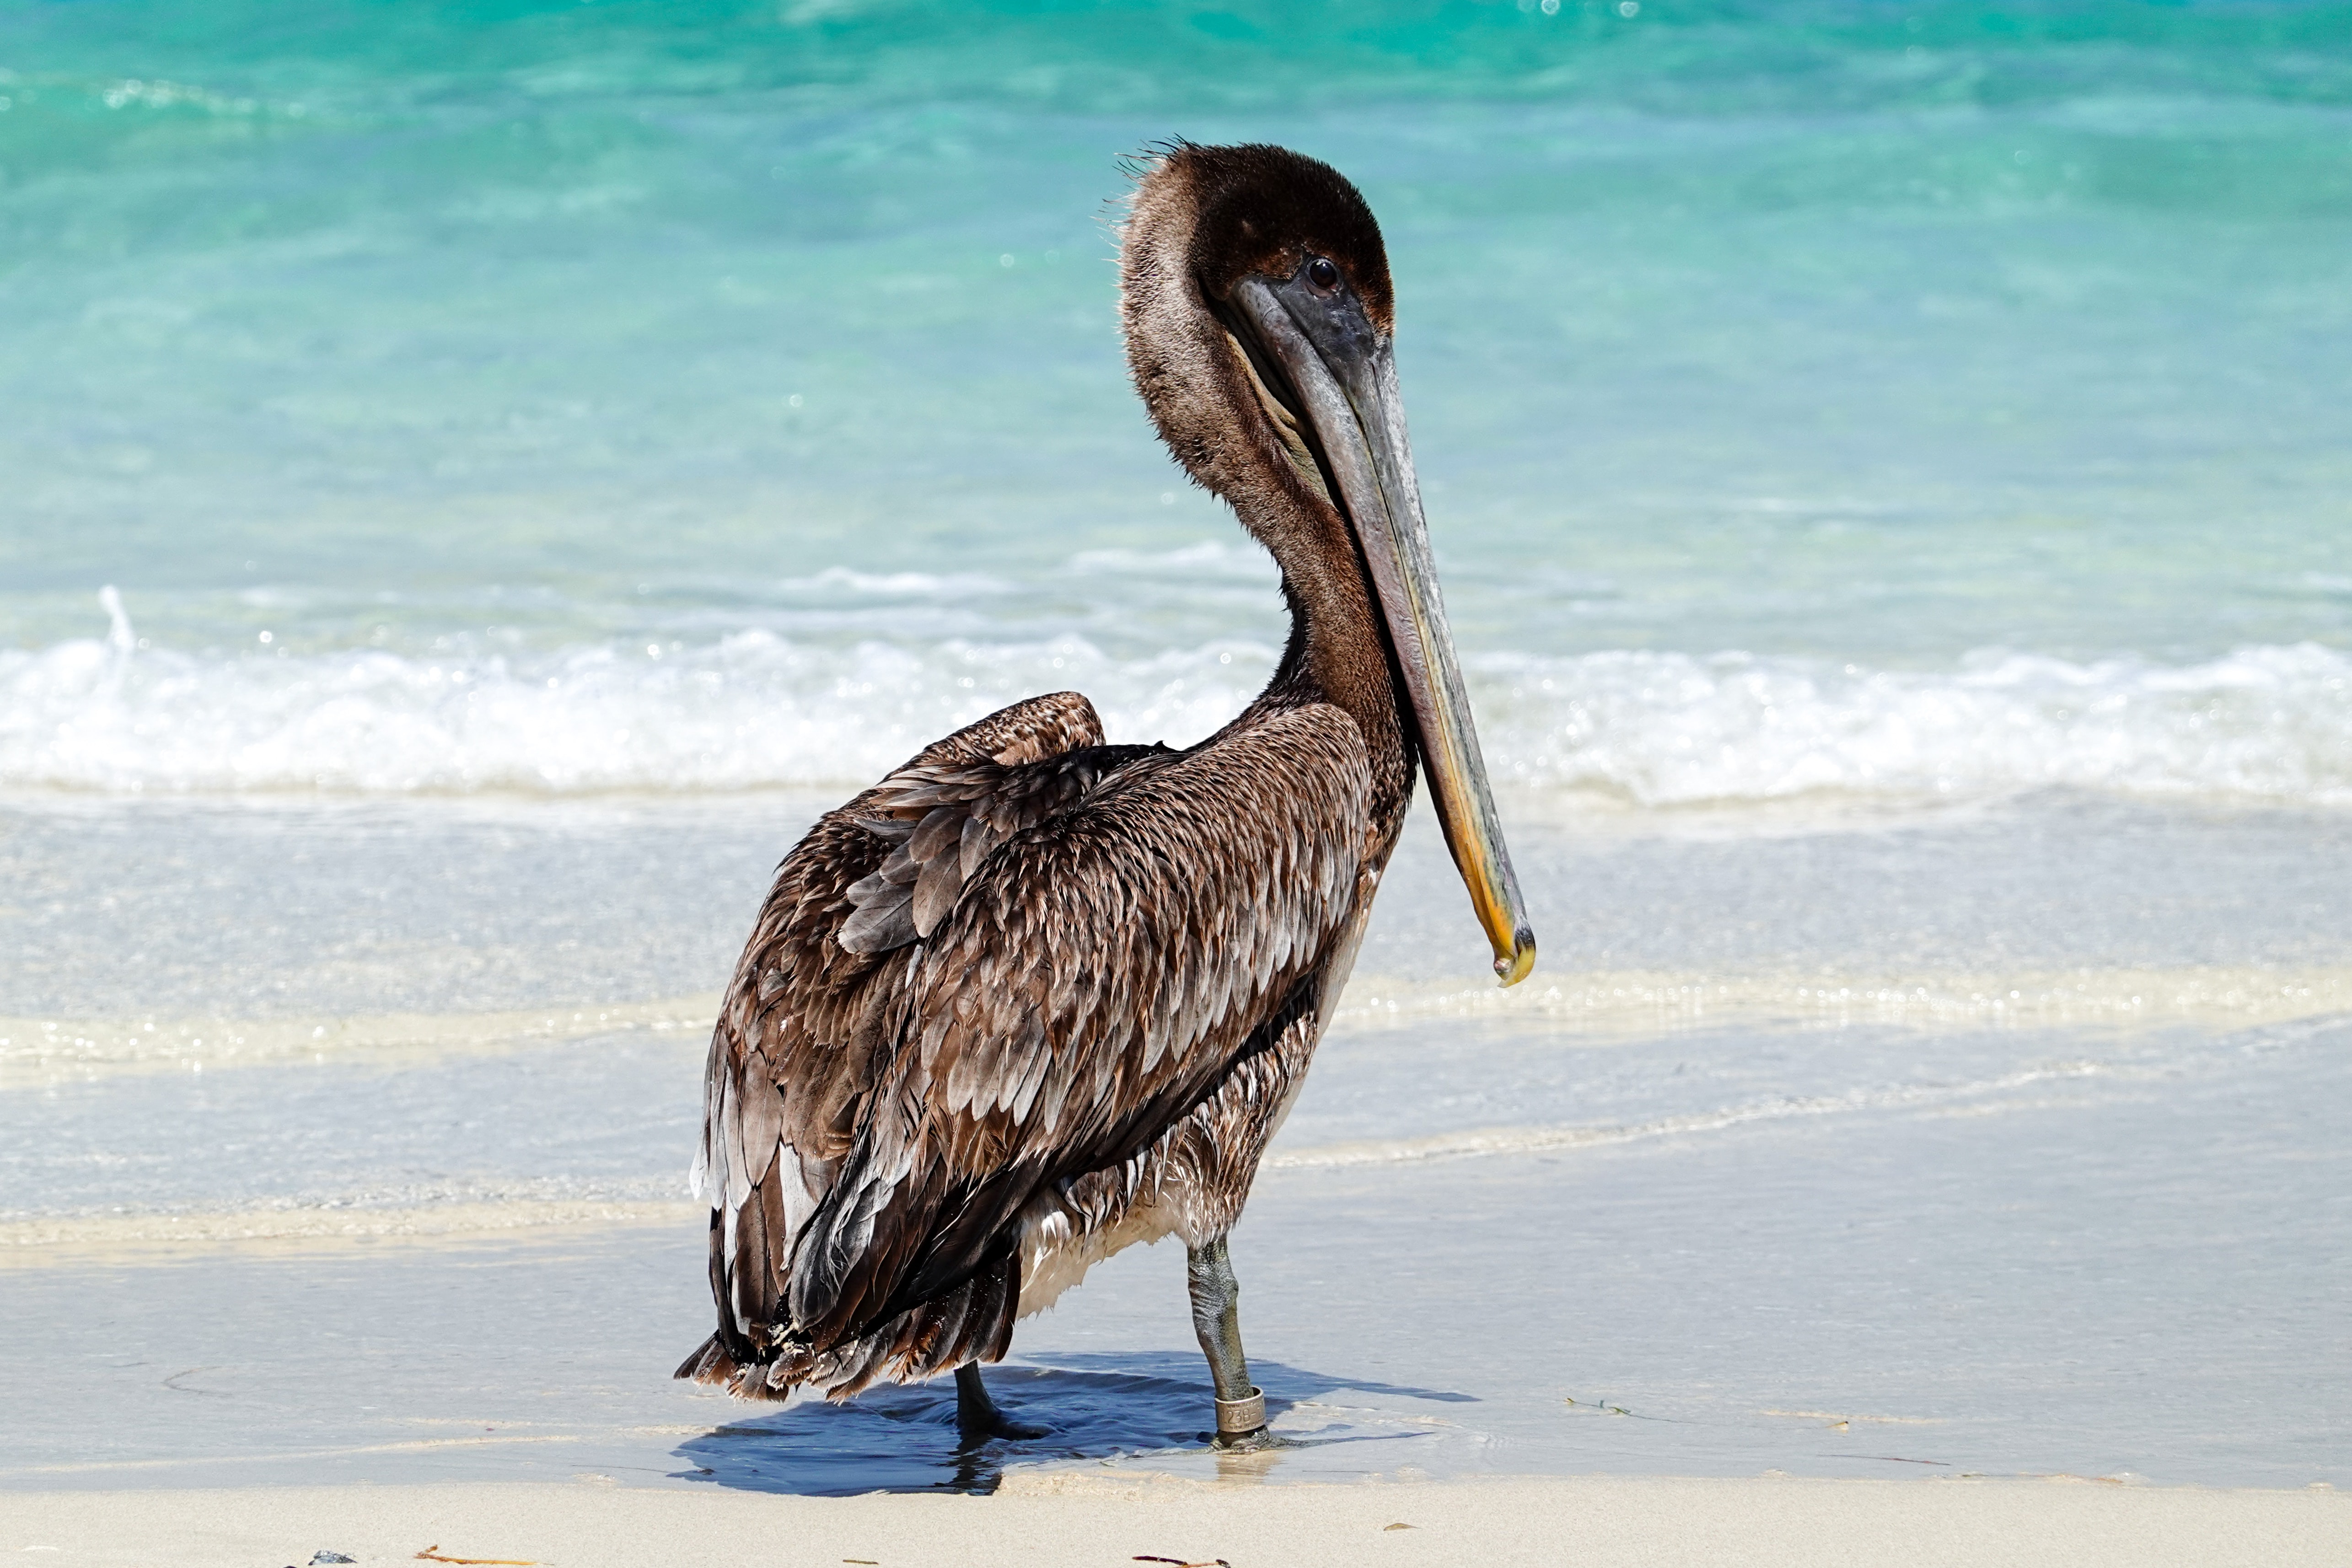 Pelican spotted by the ocean during beach birding